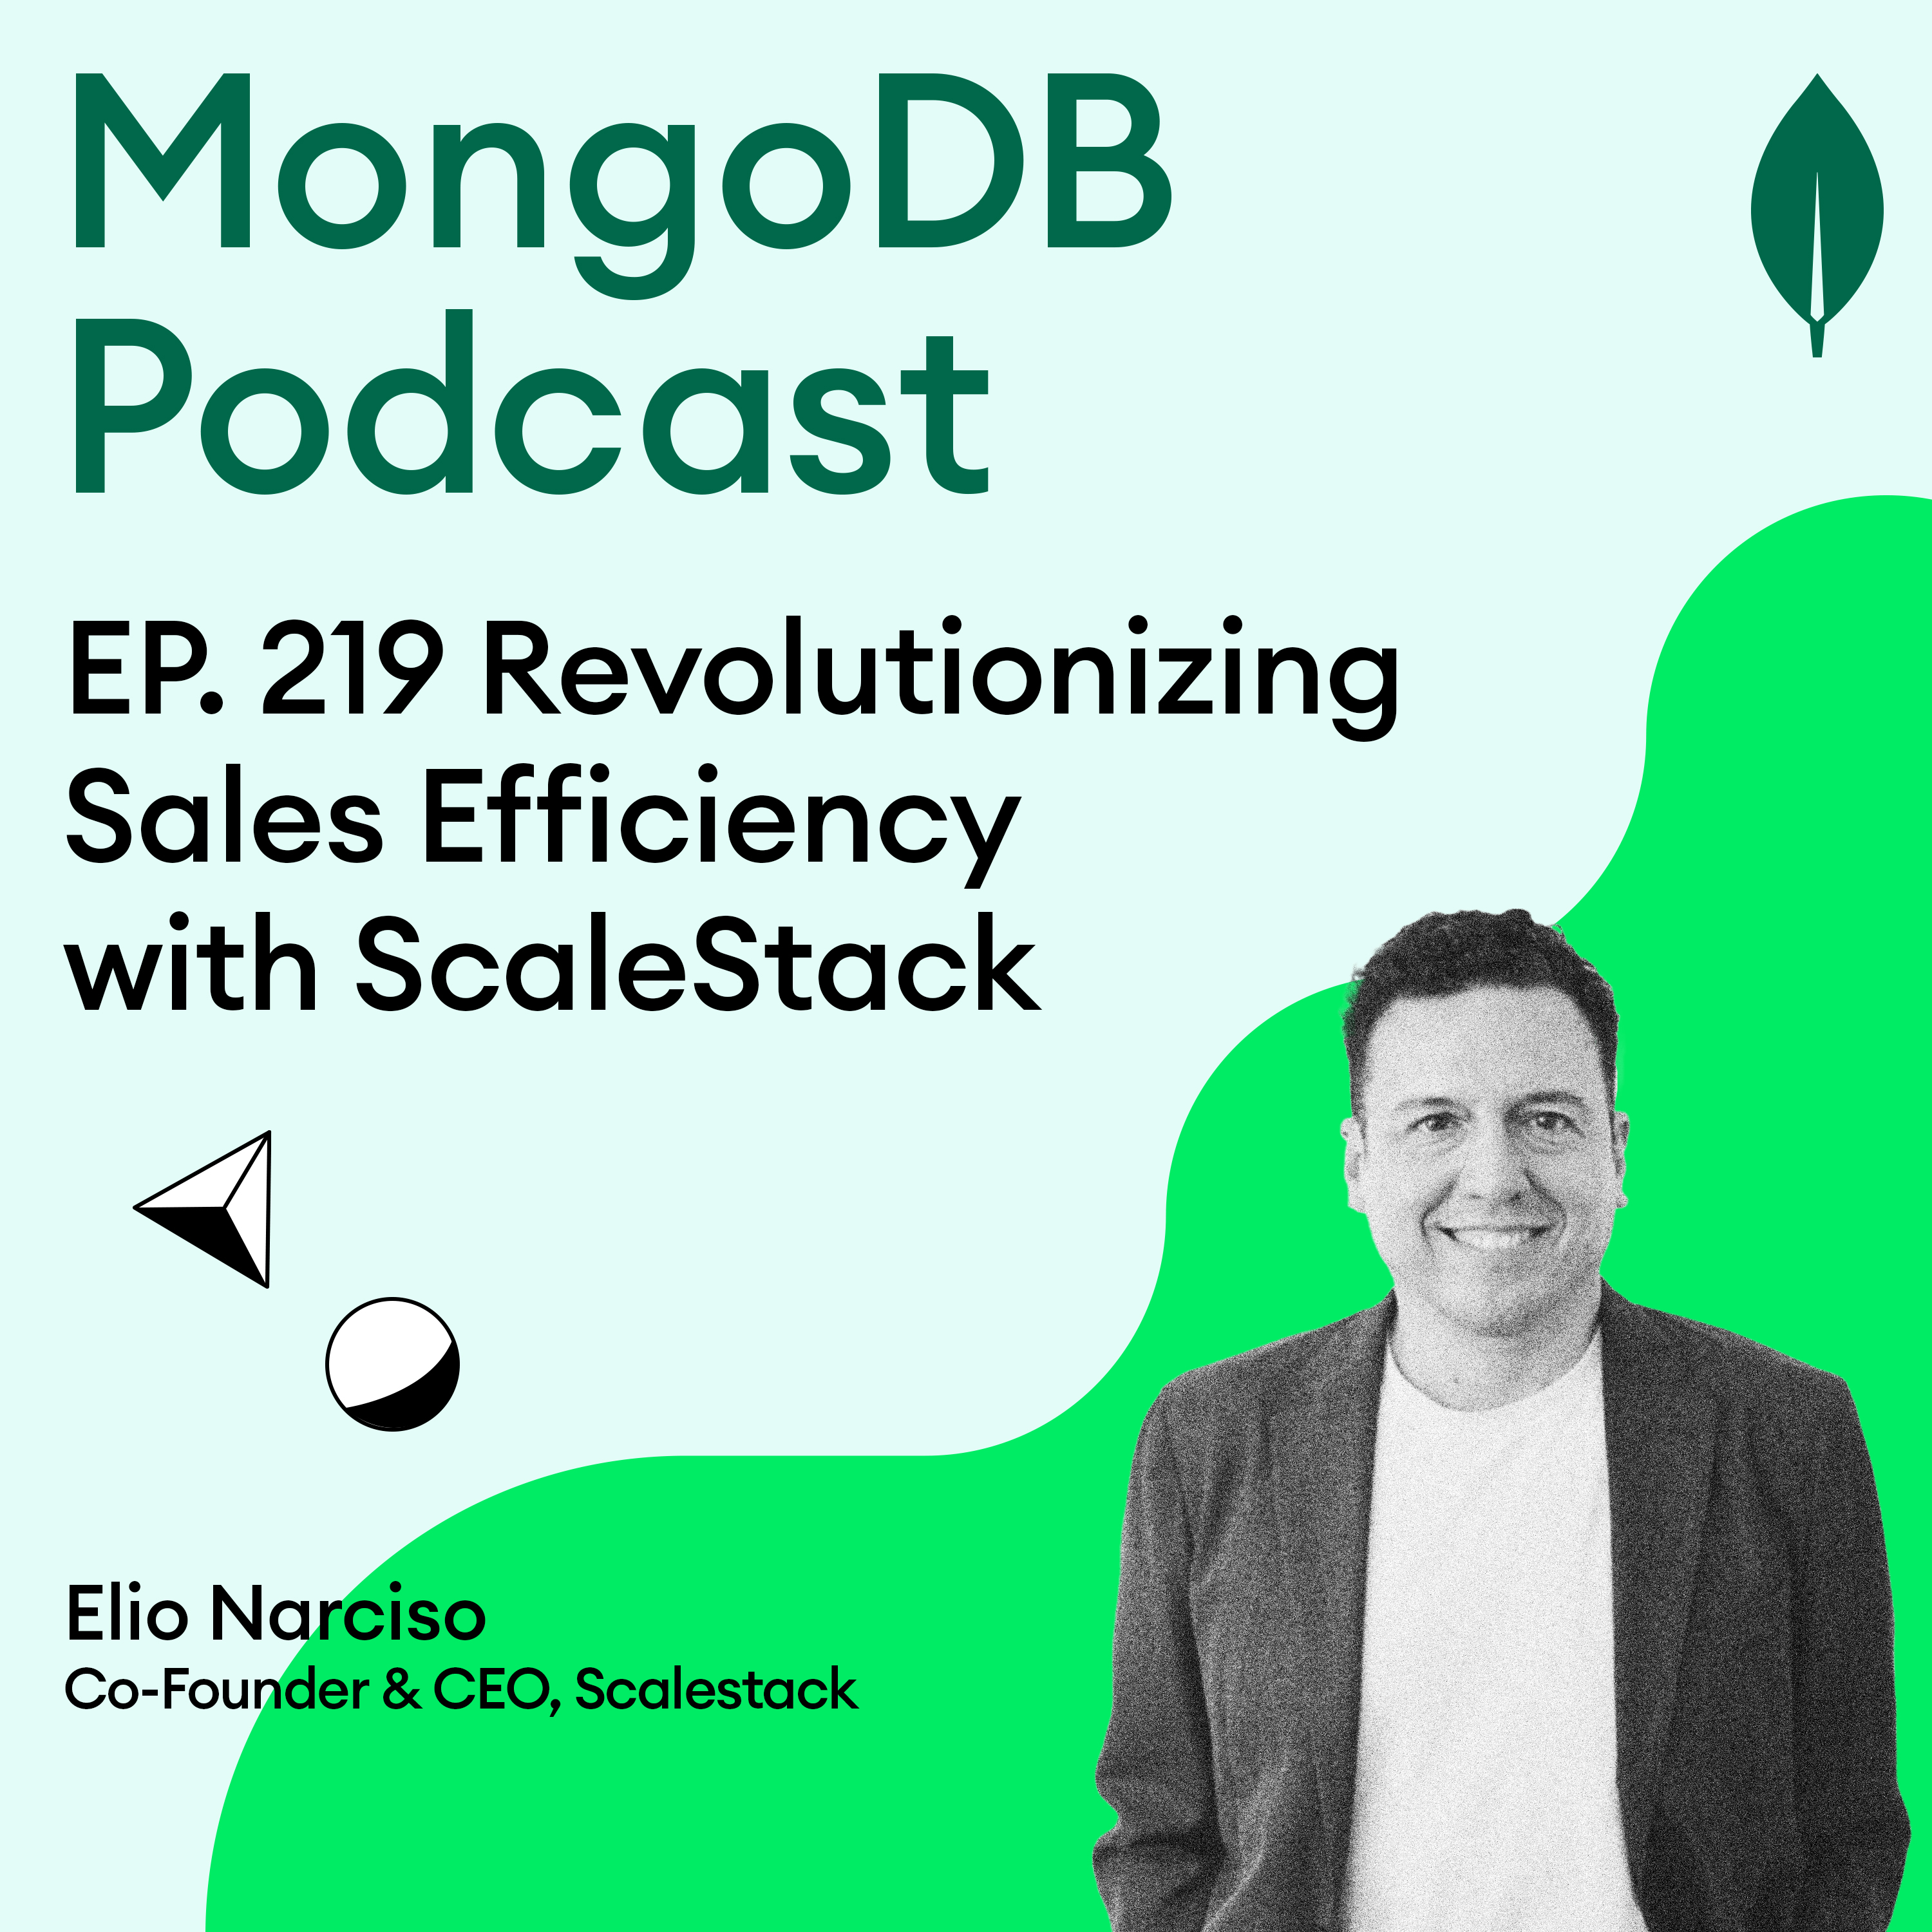 EP. 219 Revolutionizing Sales Efficiency with ScaleStack